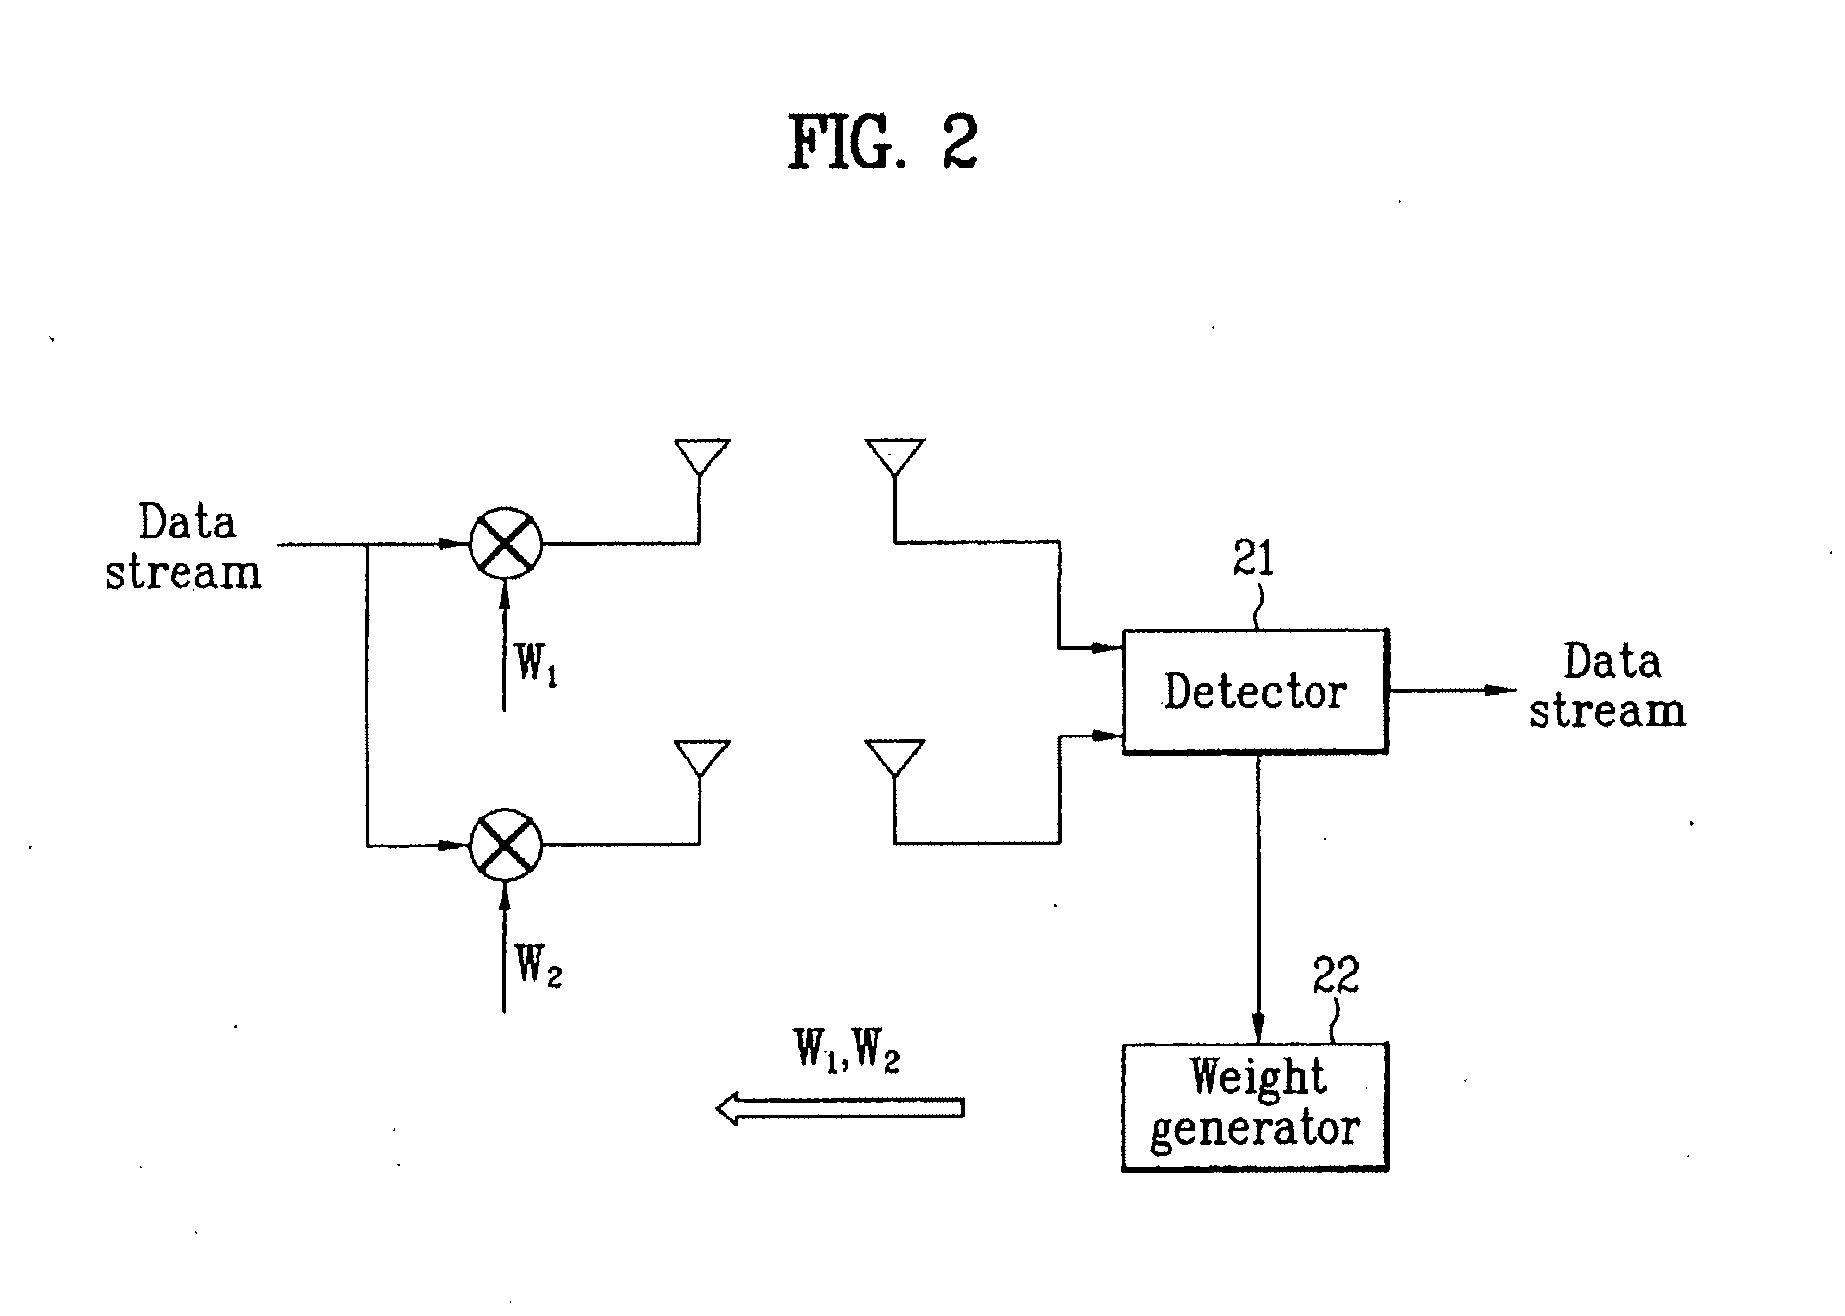 Method and system for transmitting and receiving data streams